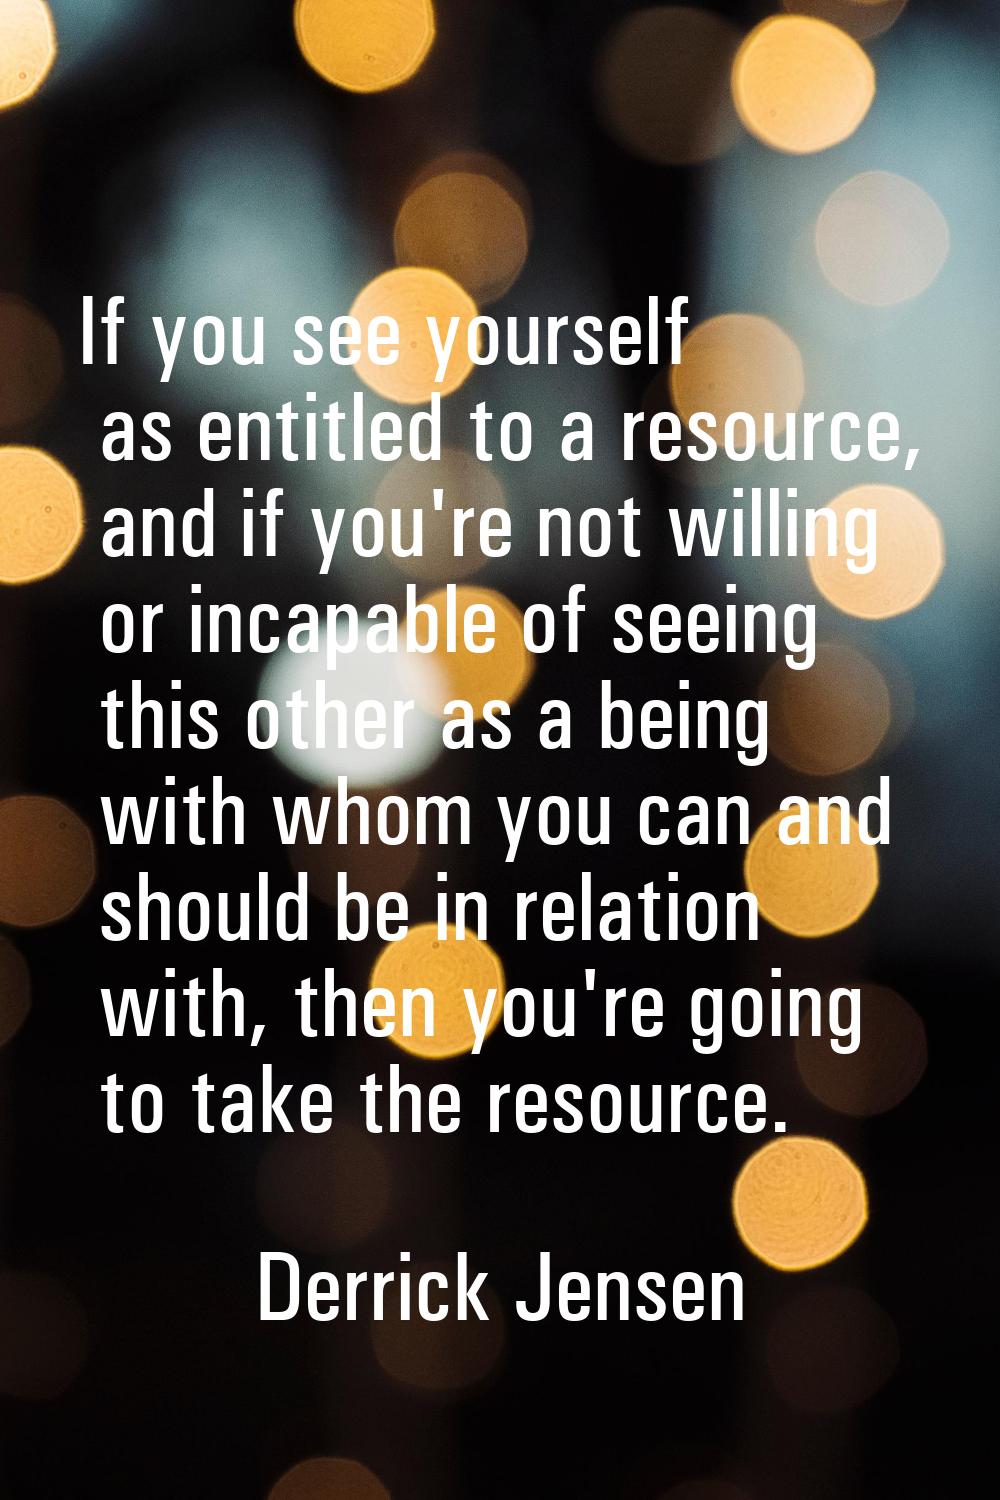 If you see yourself as entitled to a resource, and if you're not willing or incapable of seeing thi